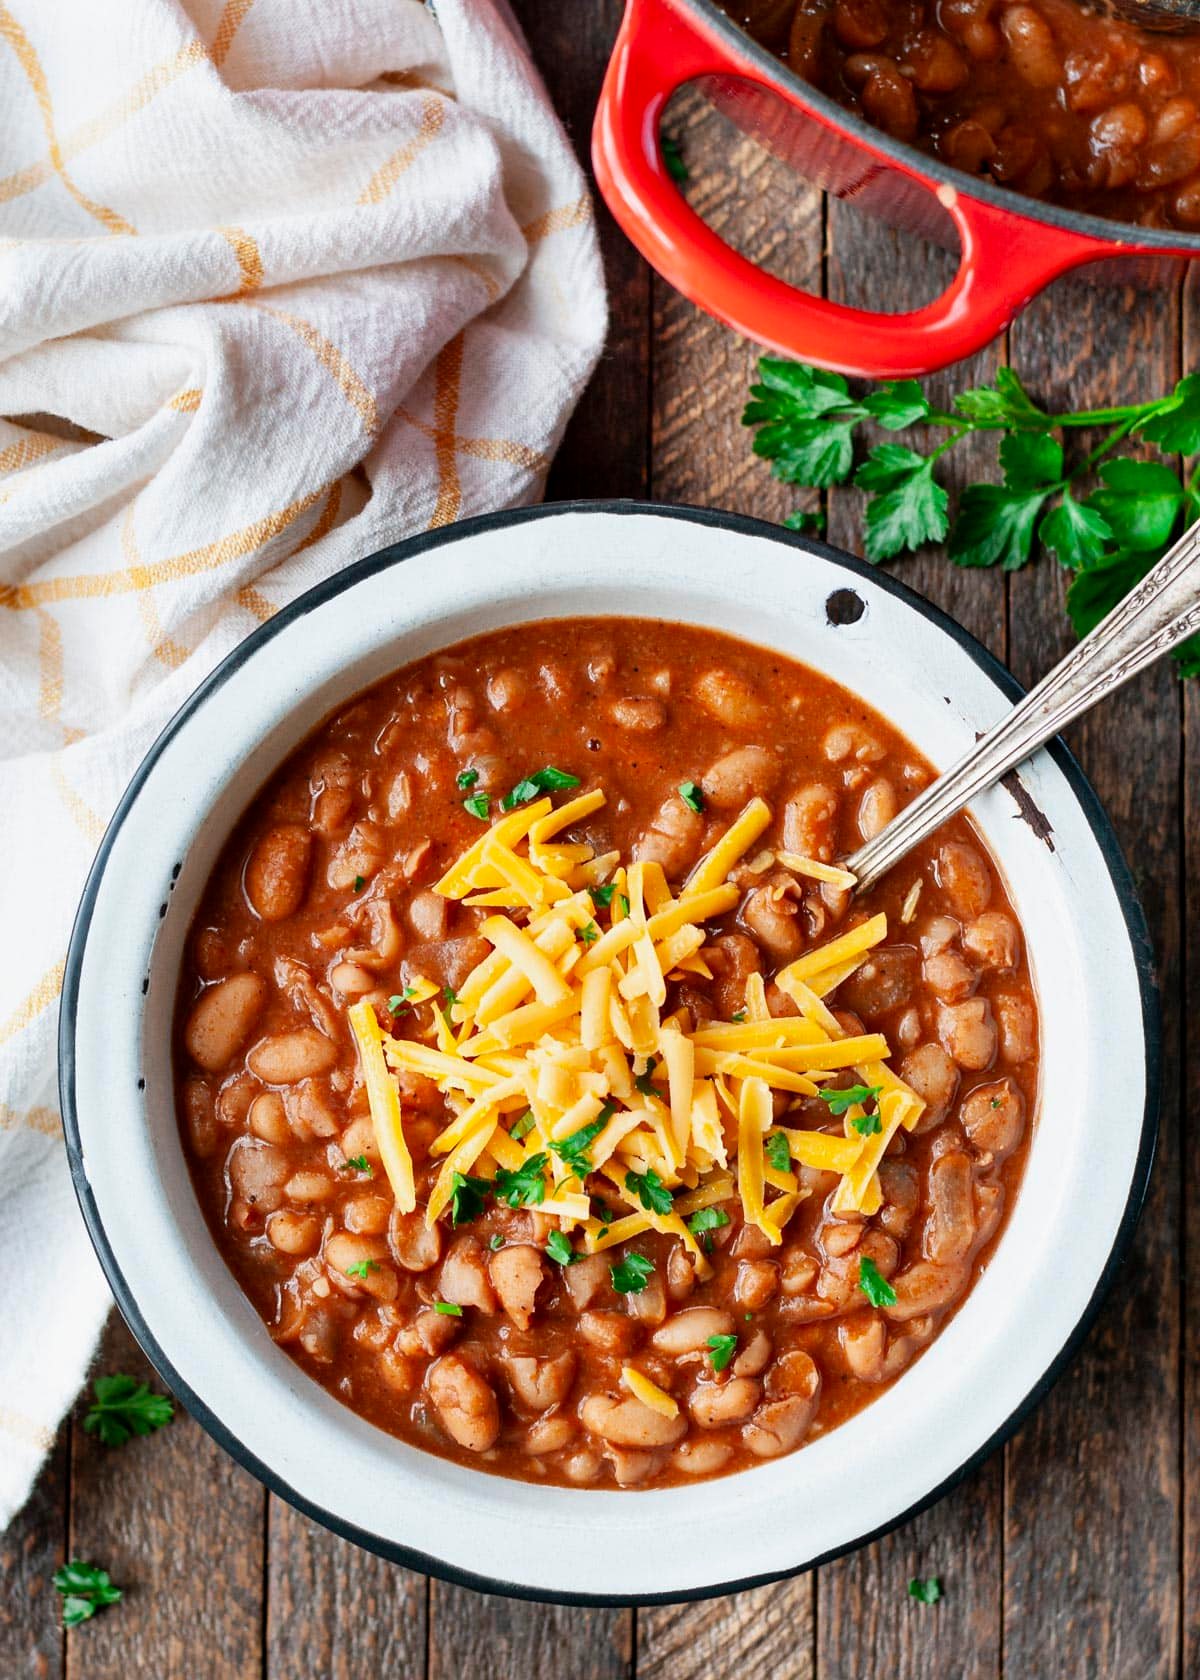 Spoon in a bowl of ranch style beans with cheese on top.